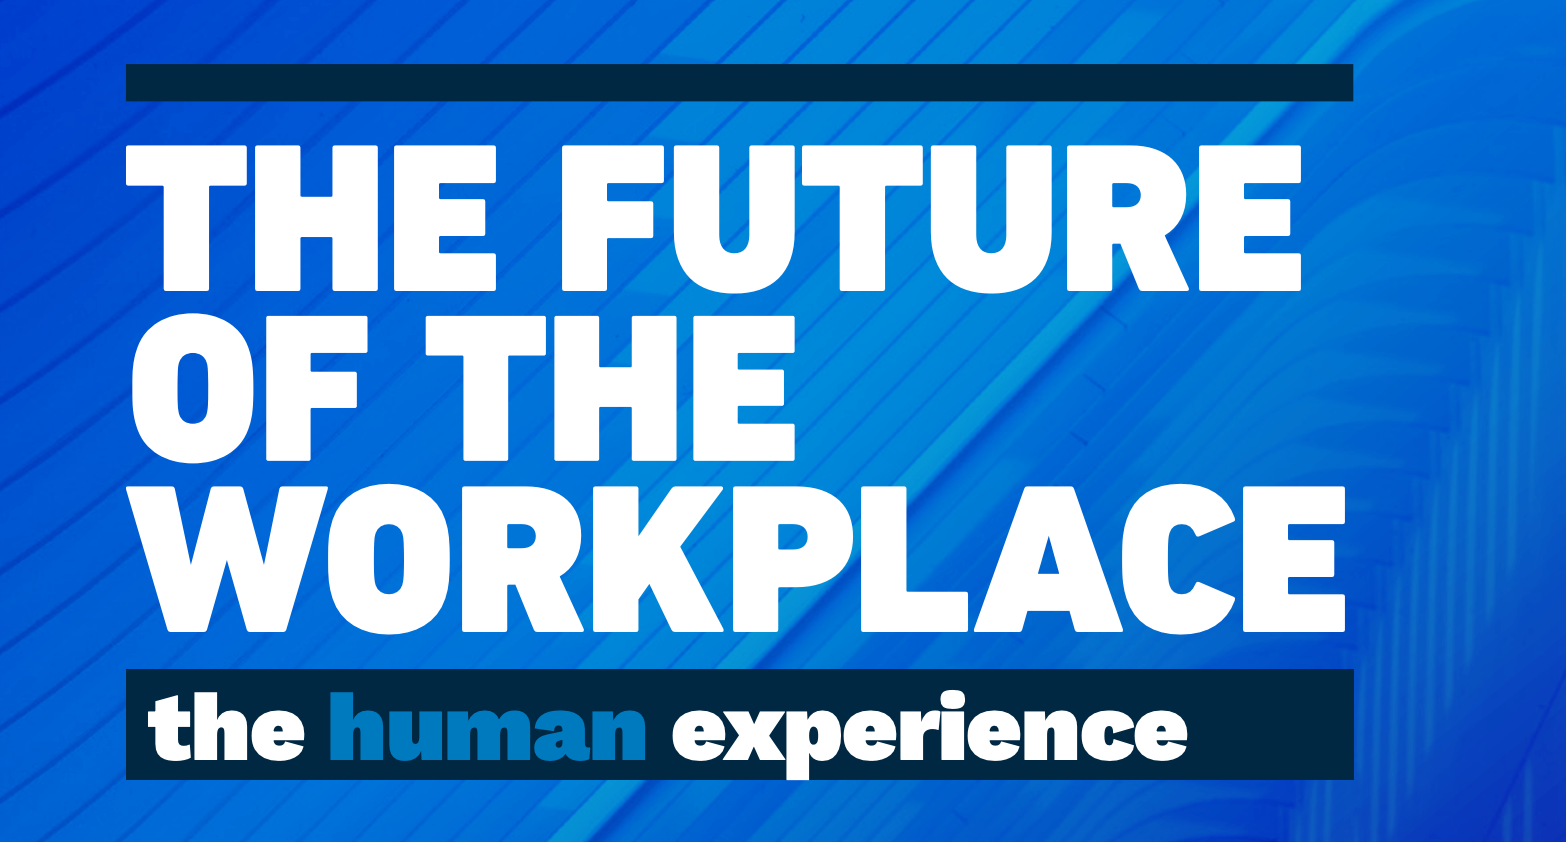 100% Human at Work - The future of the workplace report